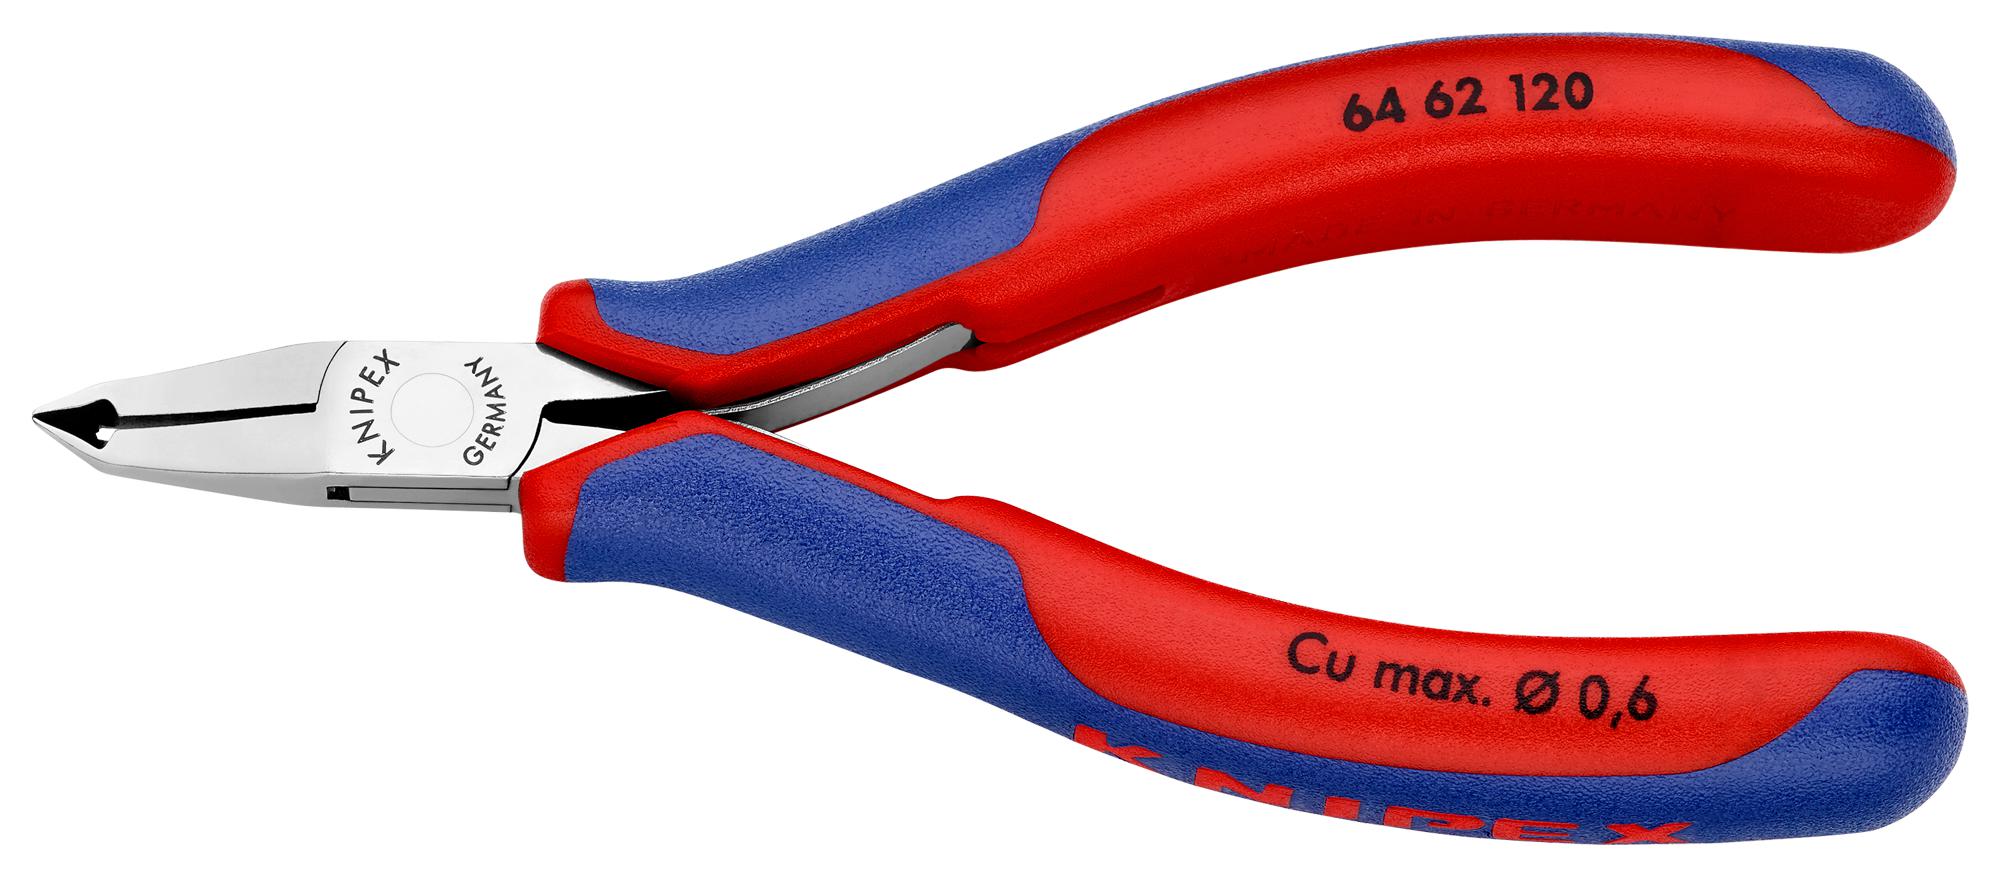 64 62 120 OBLIQUE CUTTING NIPPERS KNIPEX